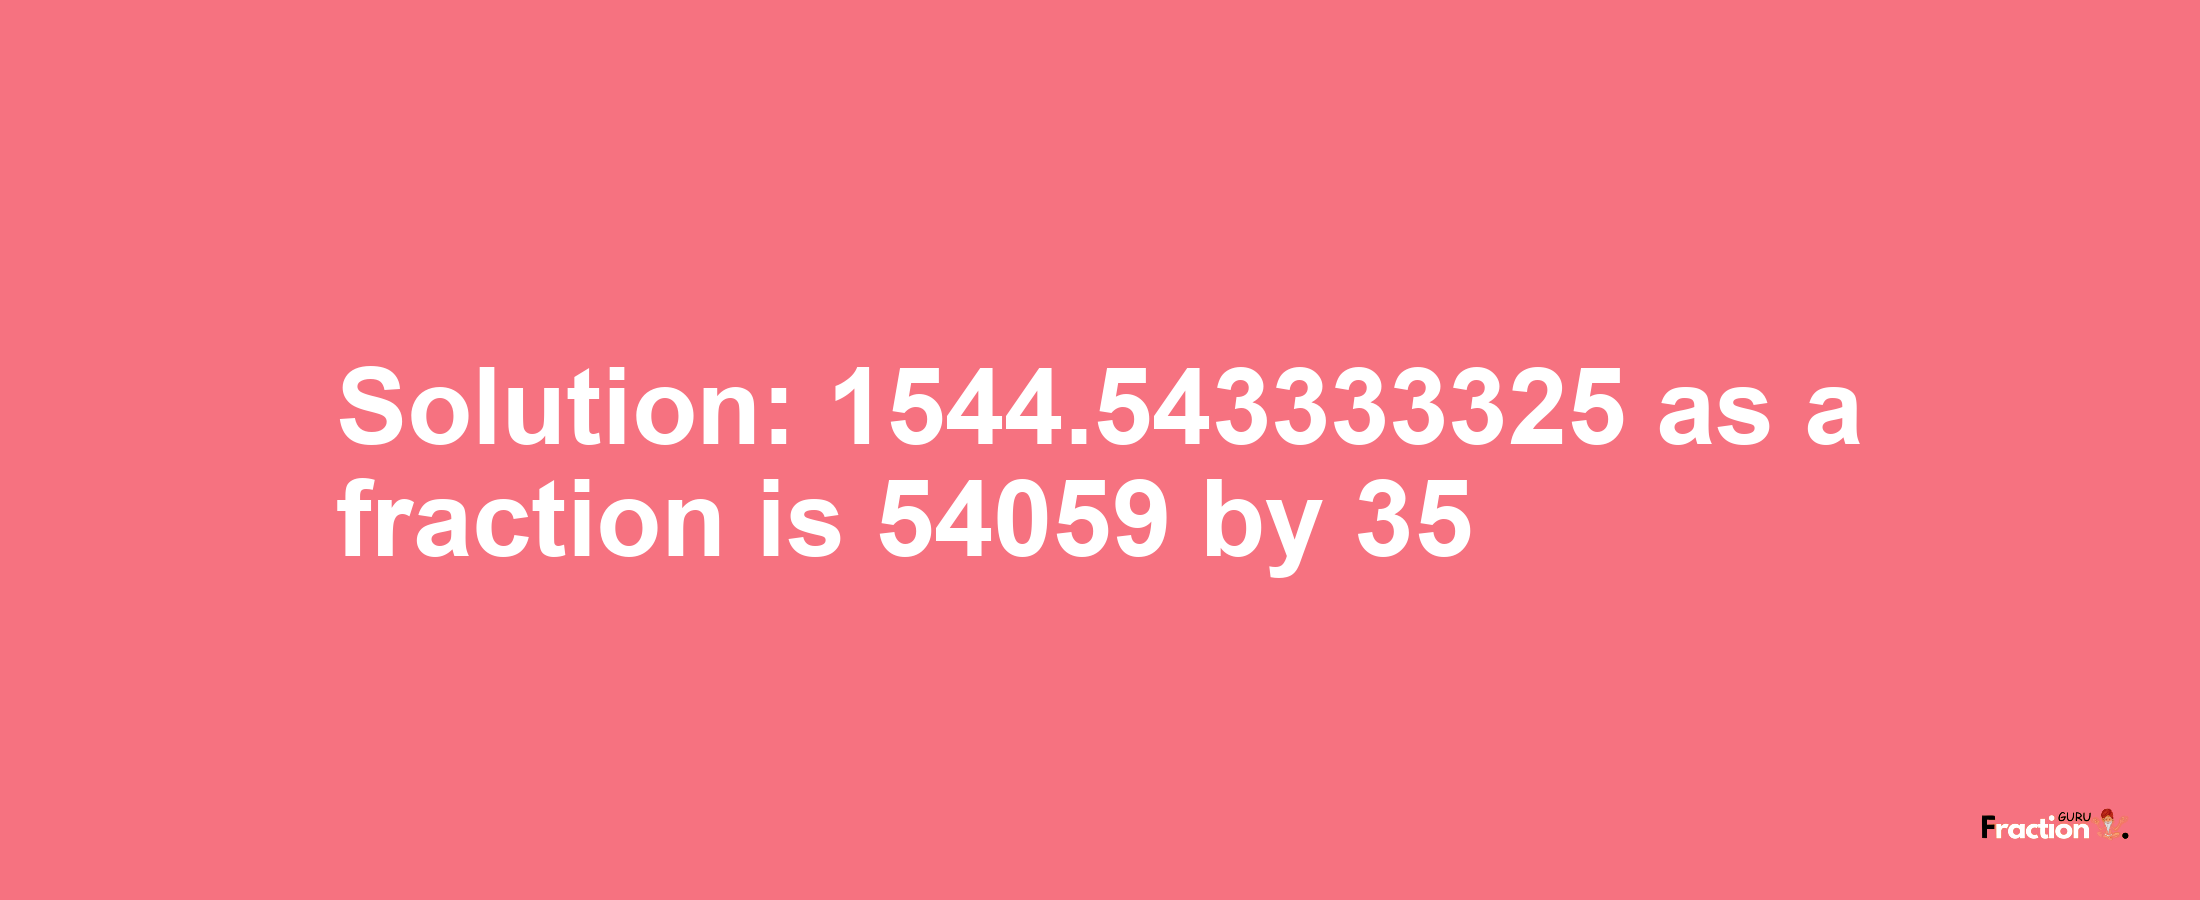 Solution:1544.543333325 as a fraction is 54059/35